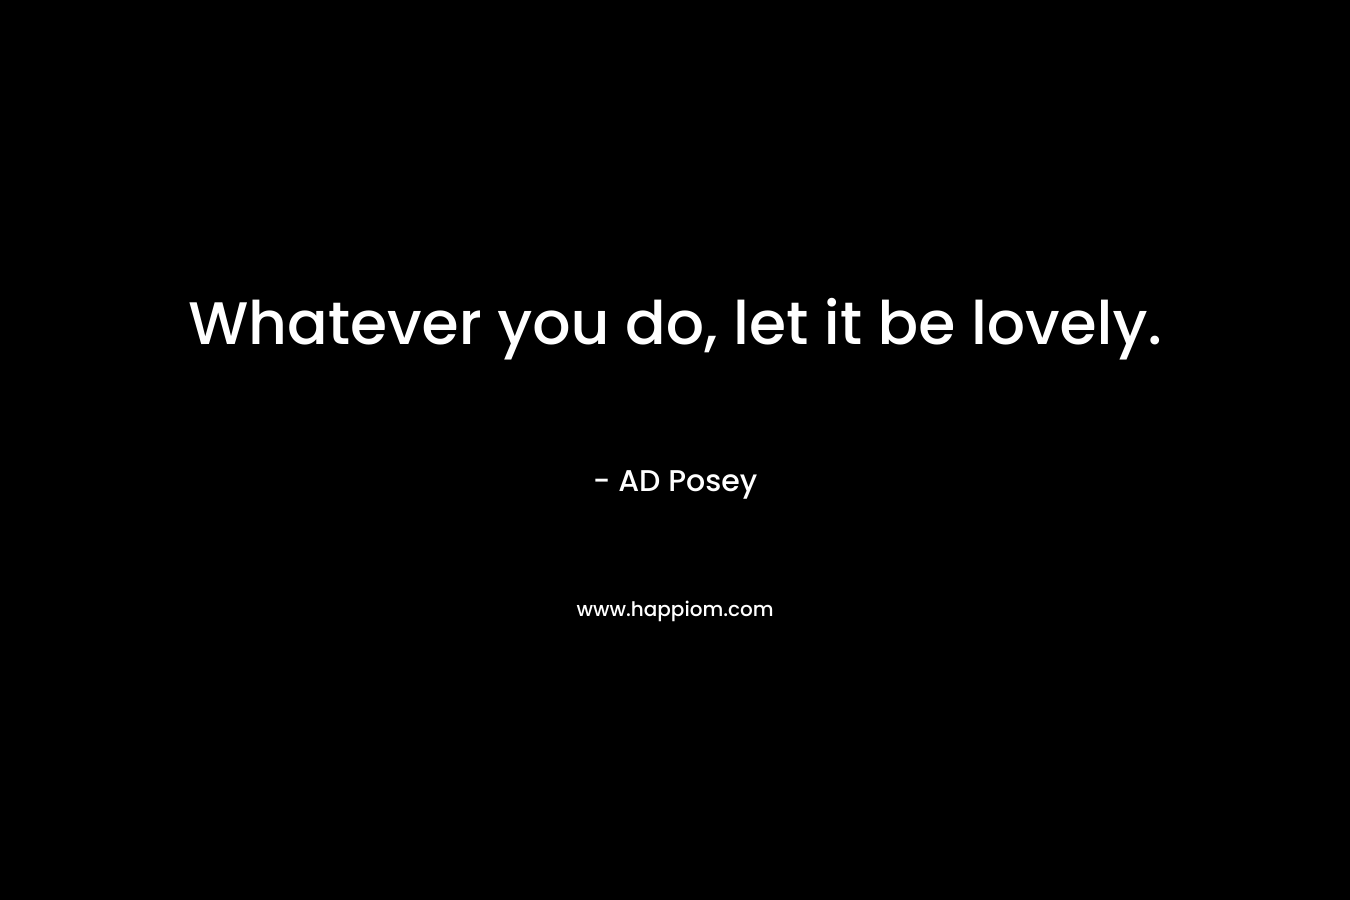 Whatever you do, let it be lovely.